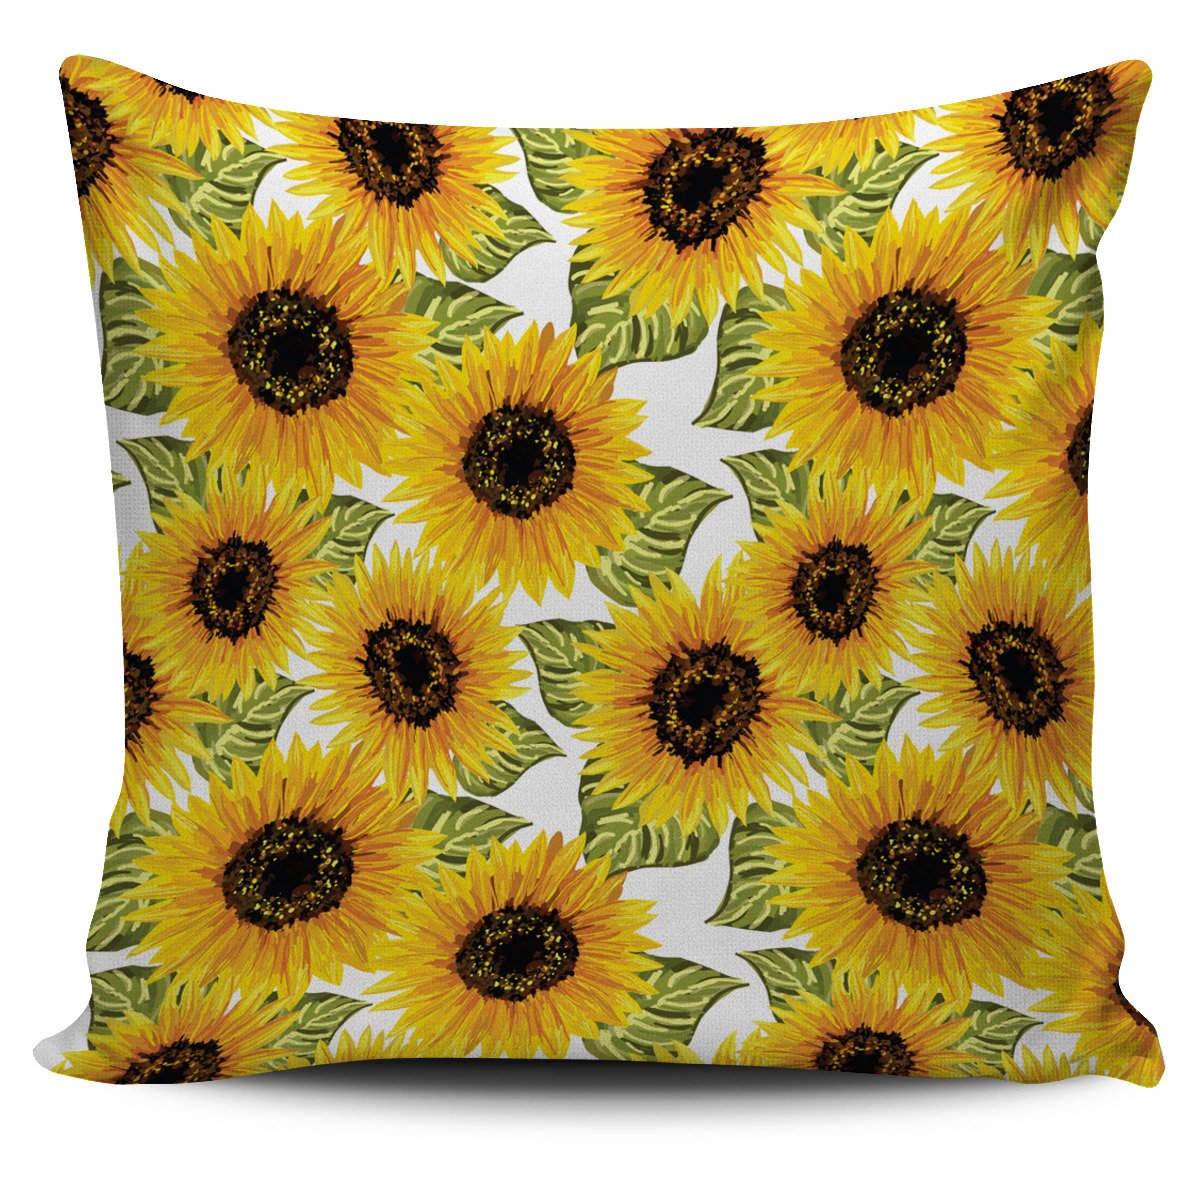 Doodle Sunflower Pattern Print Pillow Cover